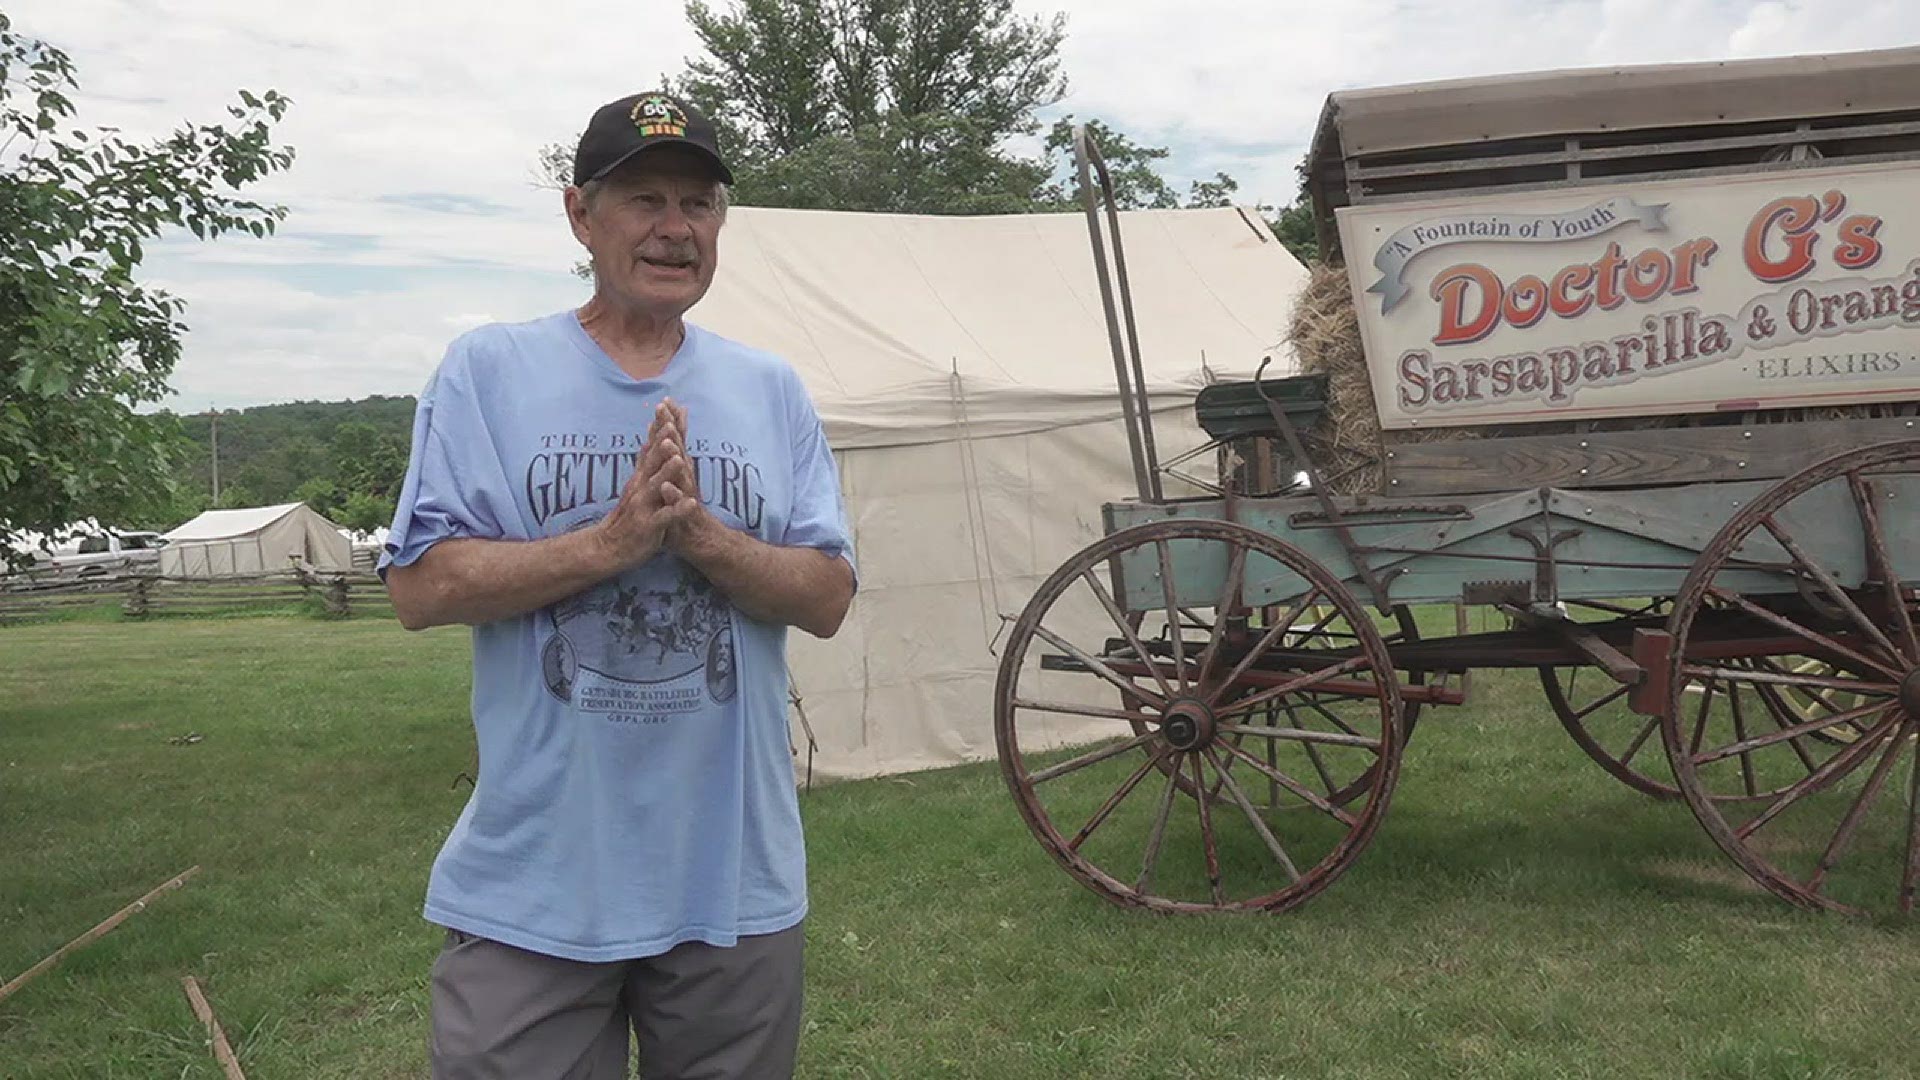 Reenactors are in Gettysburg this weekend for the 4th of July